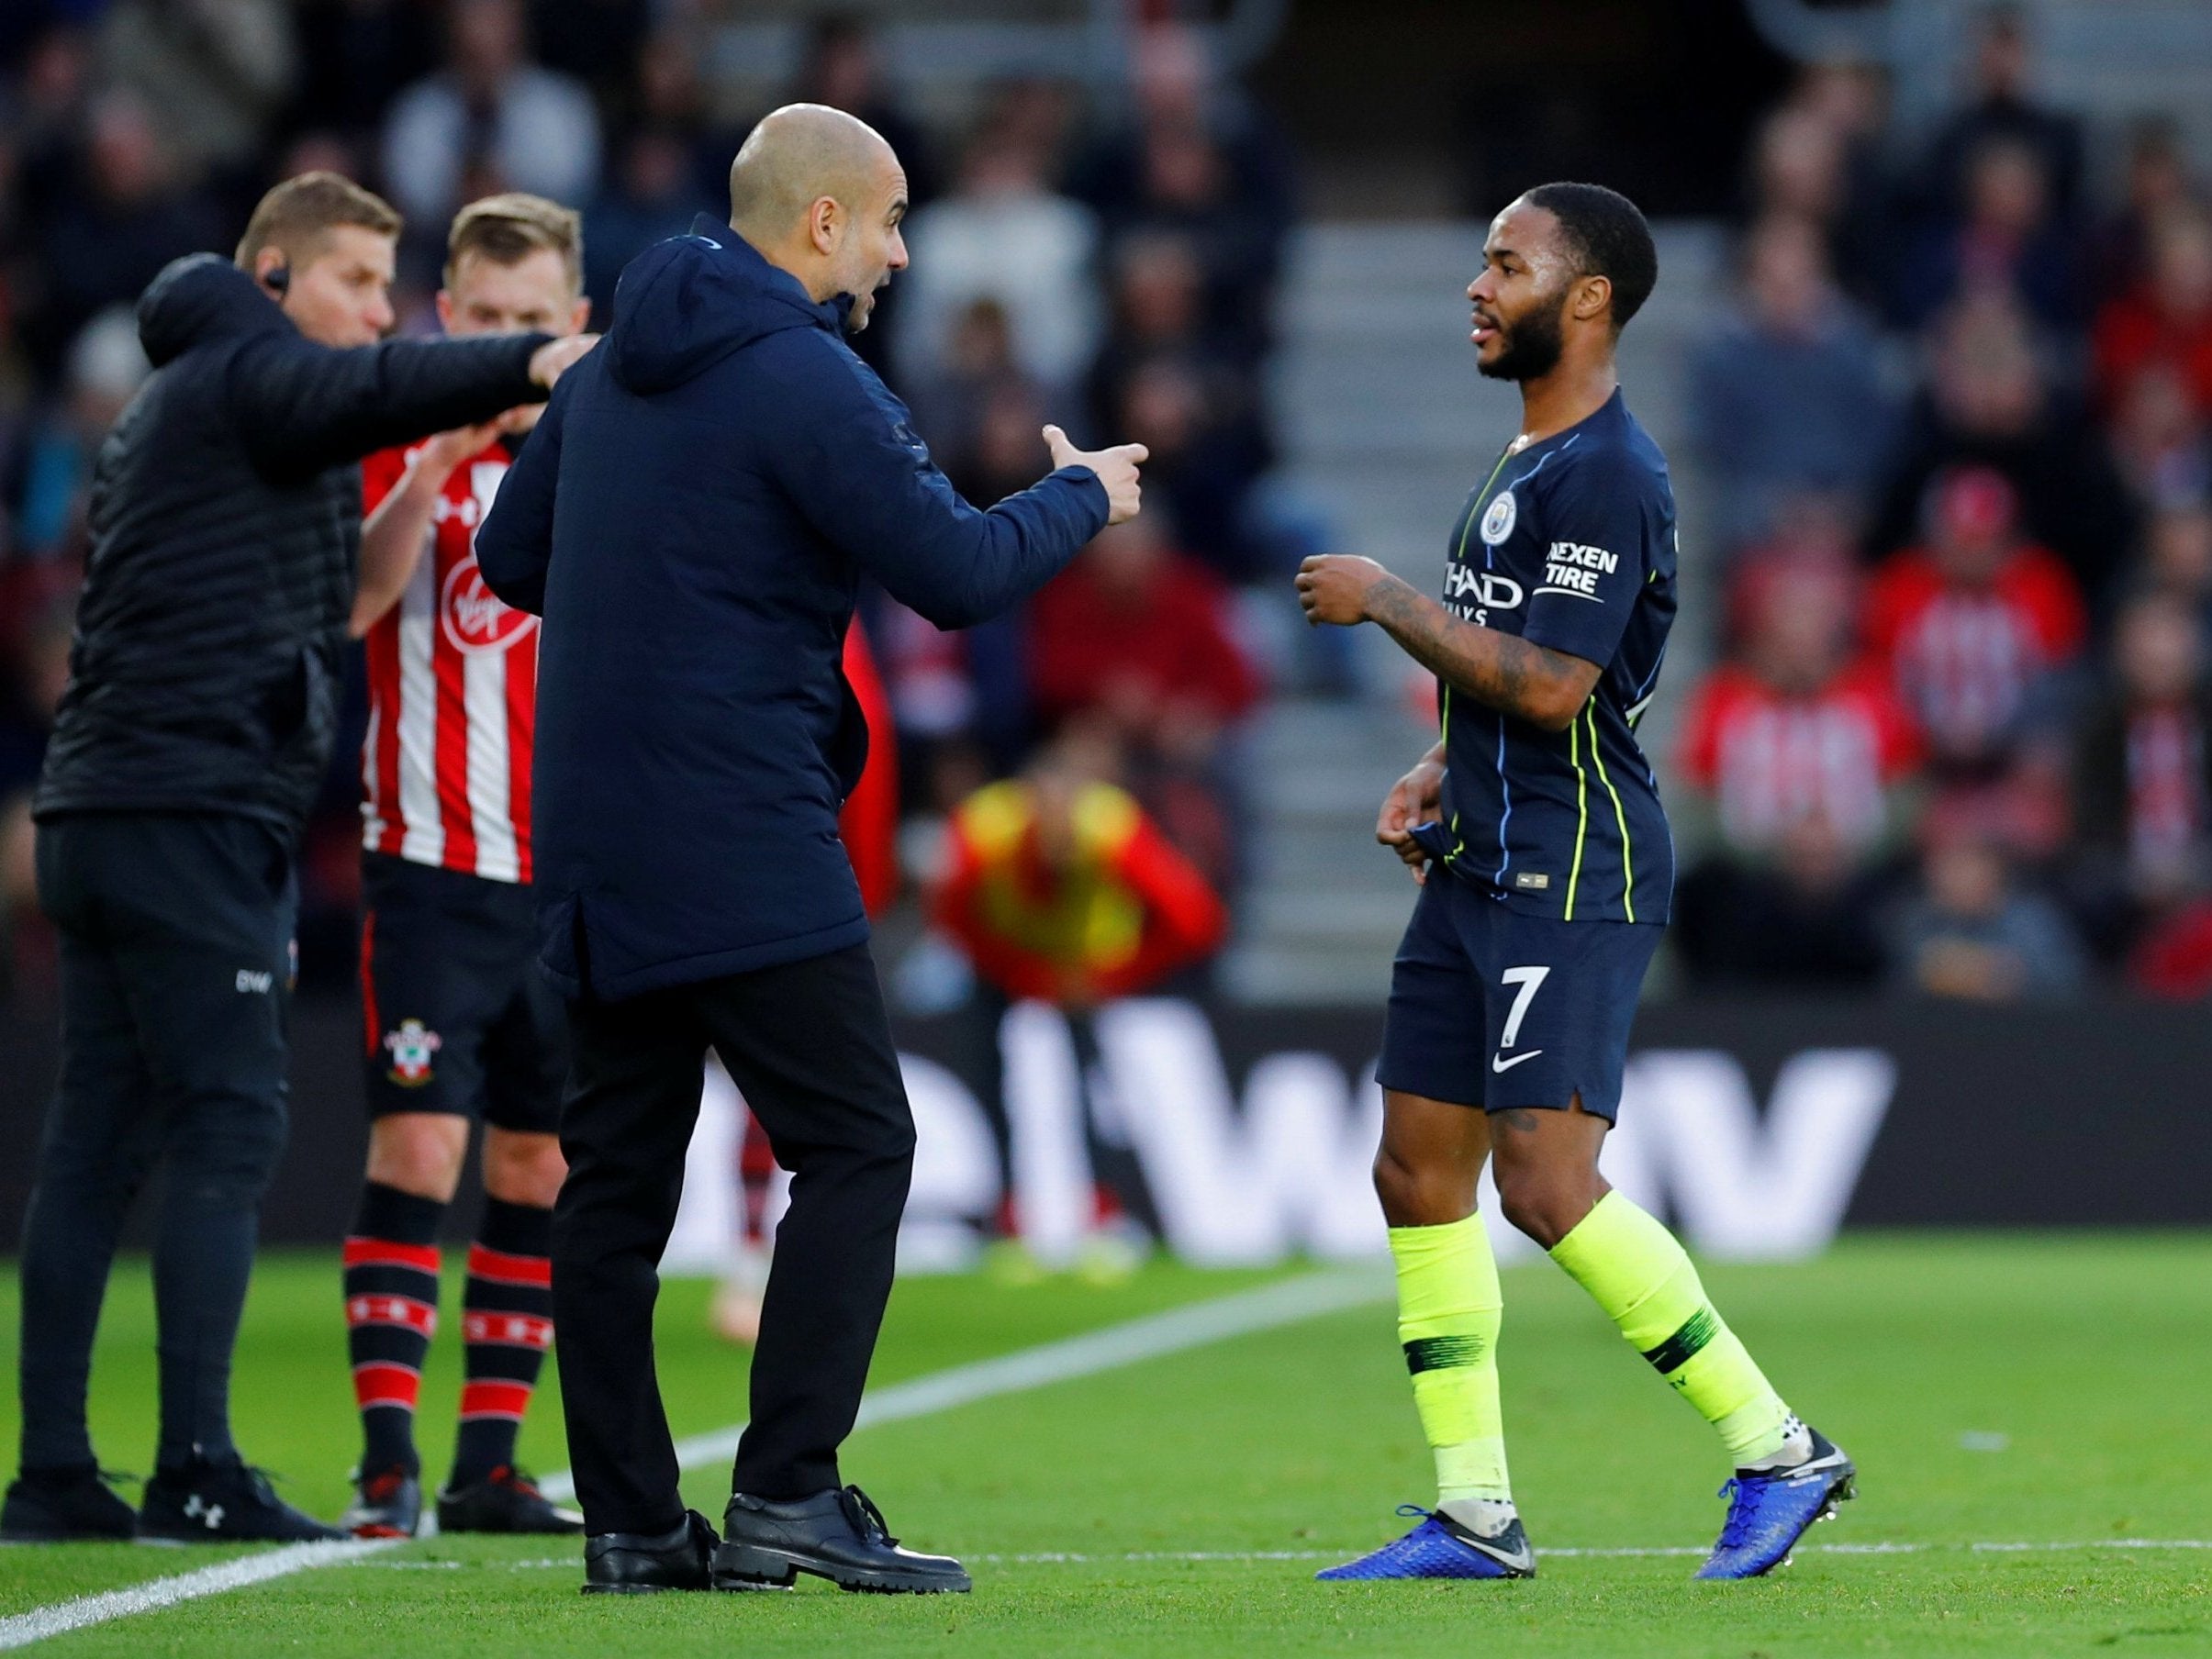 Raheem Sterling receives instructions from Pep Guardiola